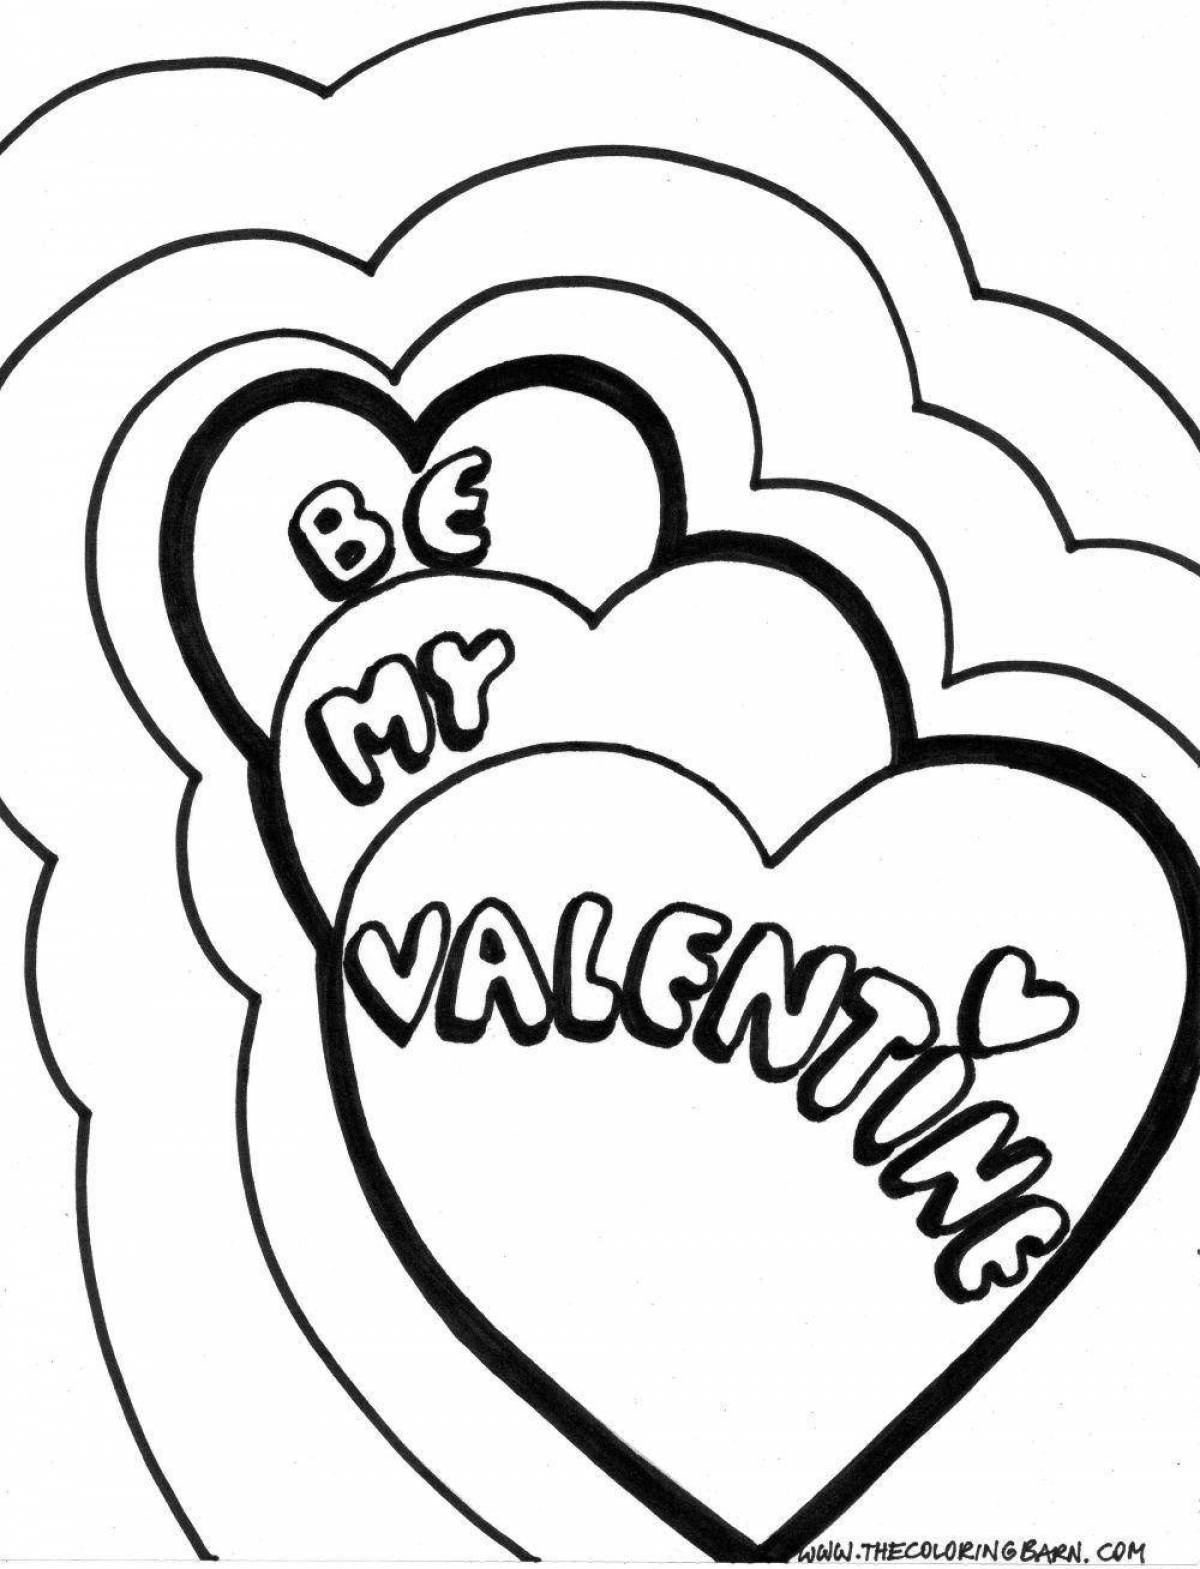 Gorgeous valentine's coloring book